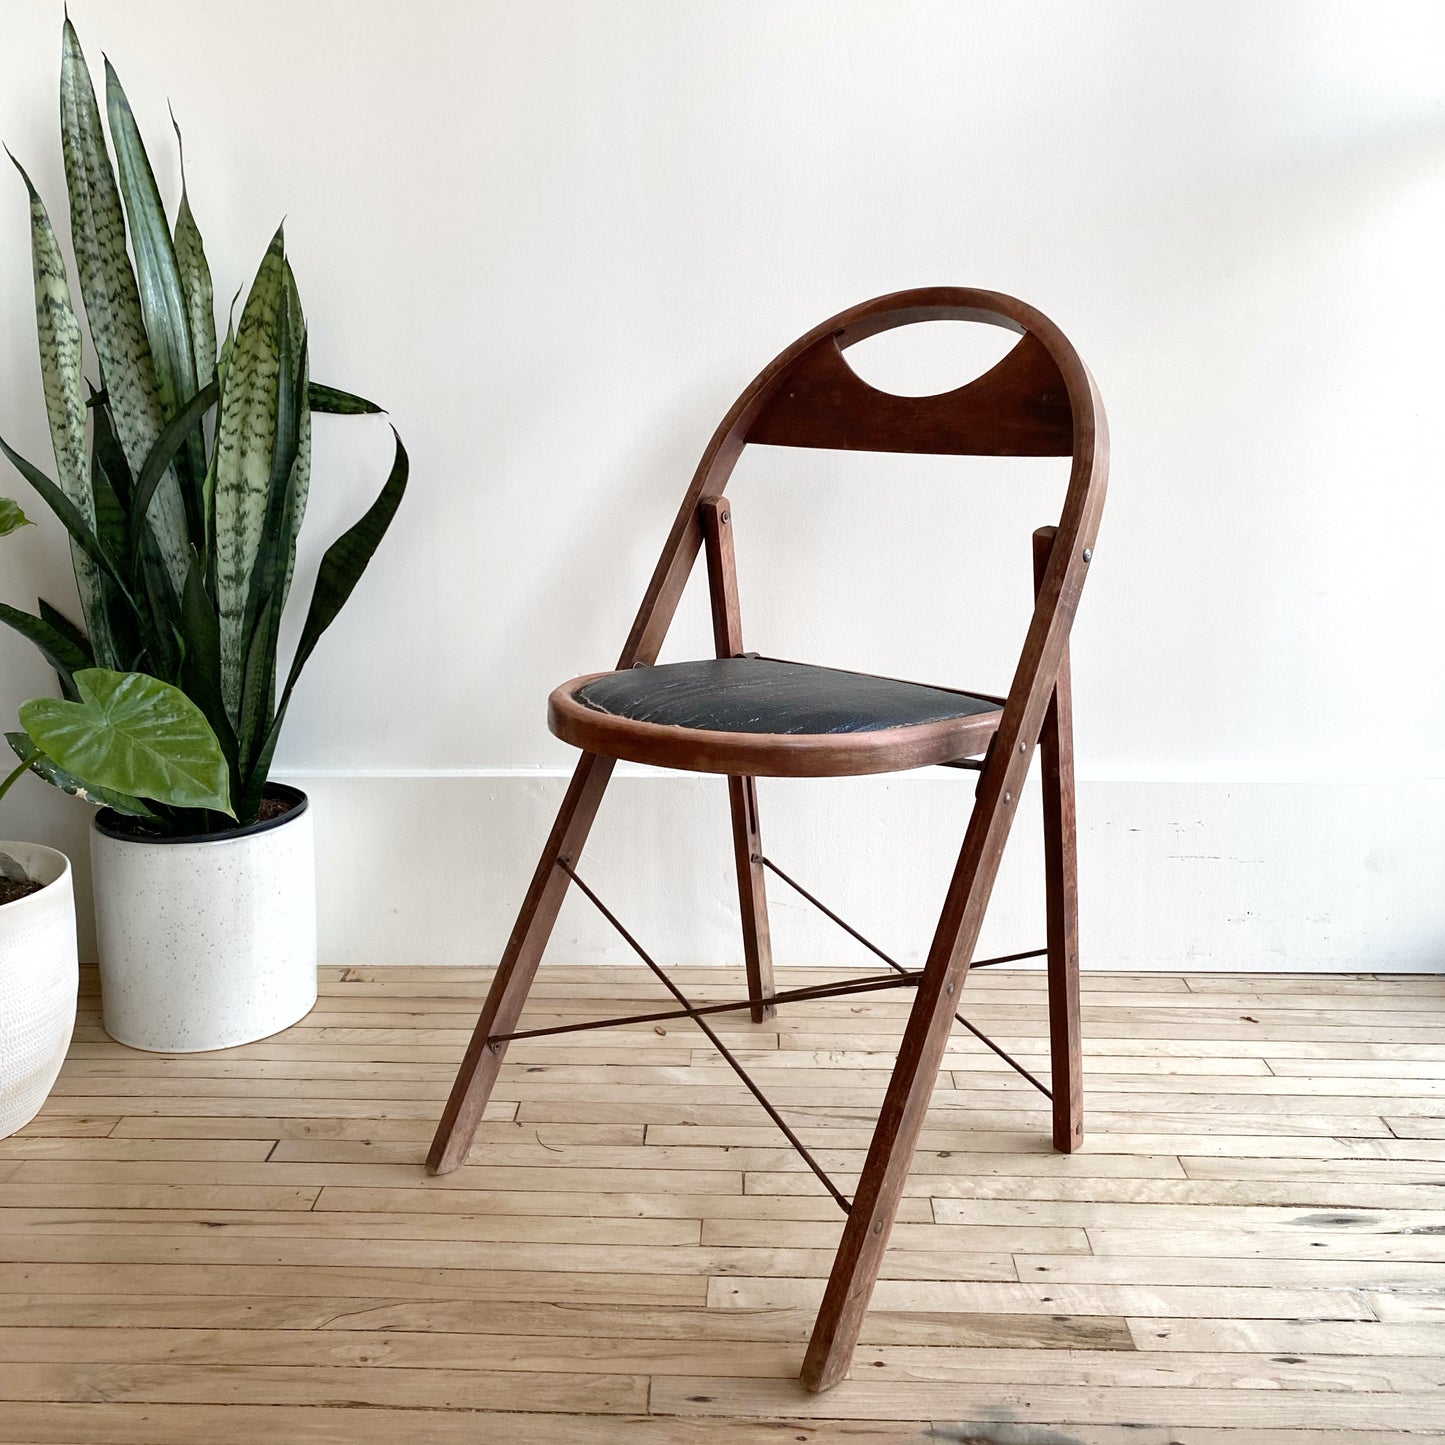 Vintage 1930’s Folding Chair with Black Seat